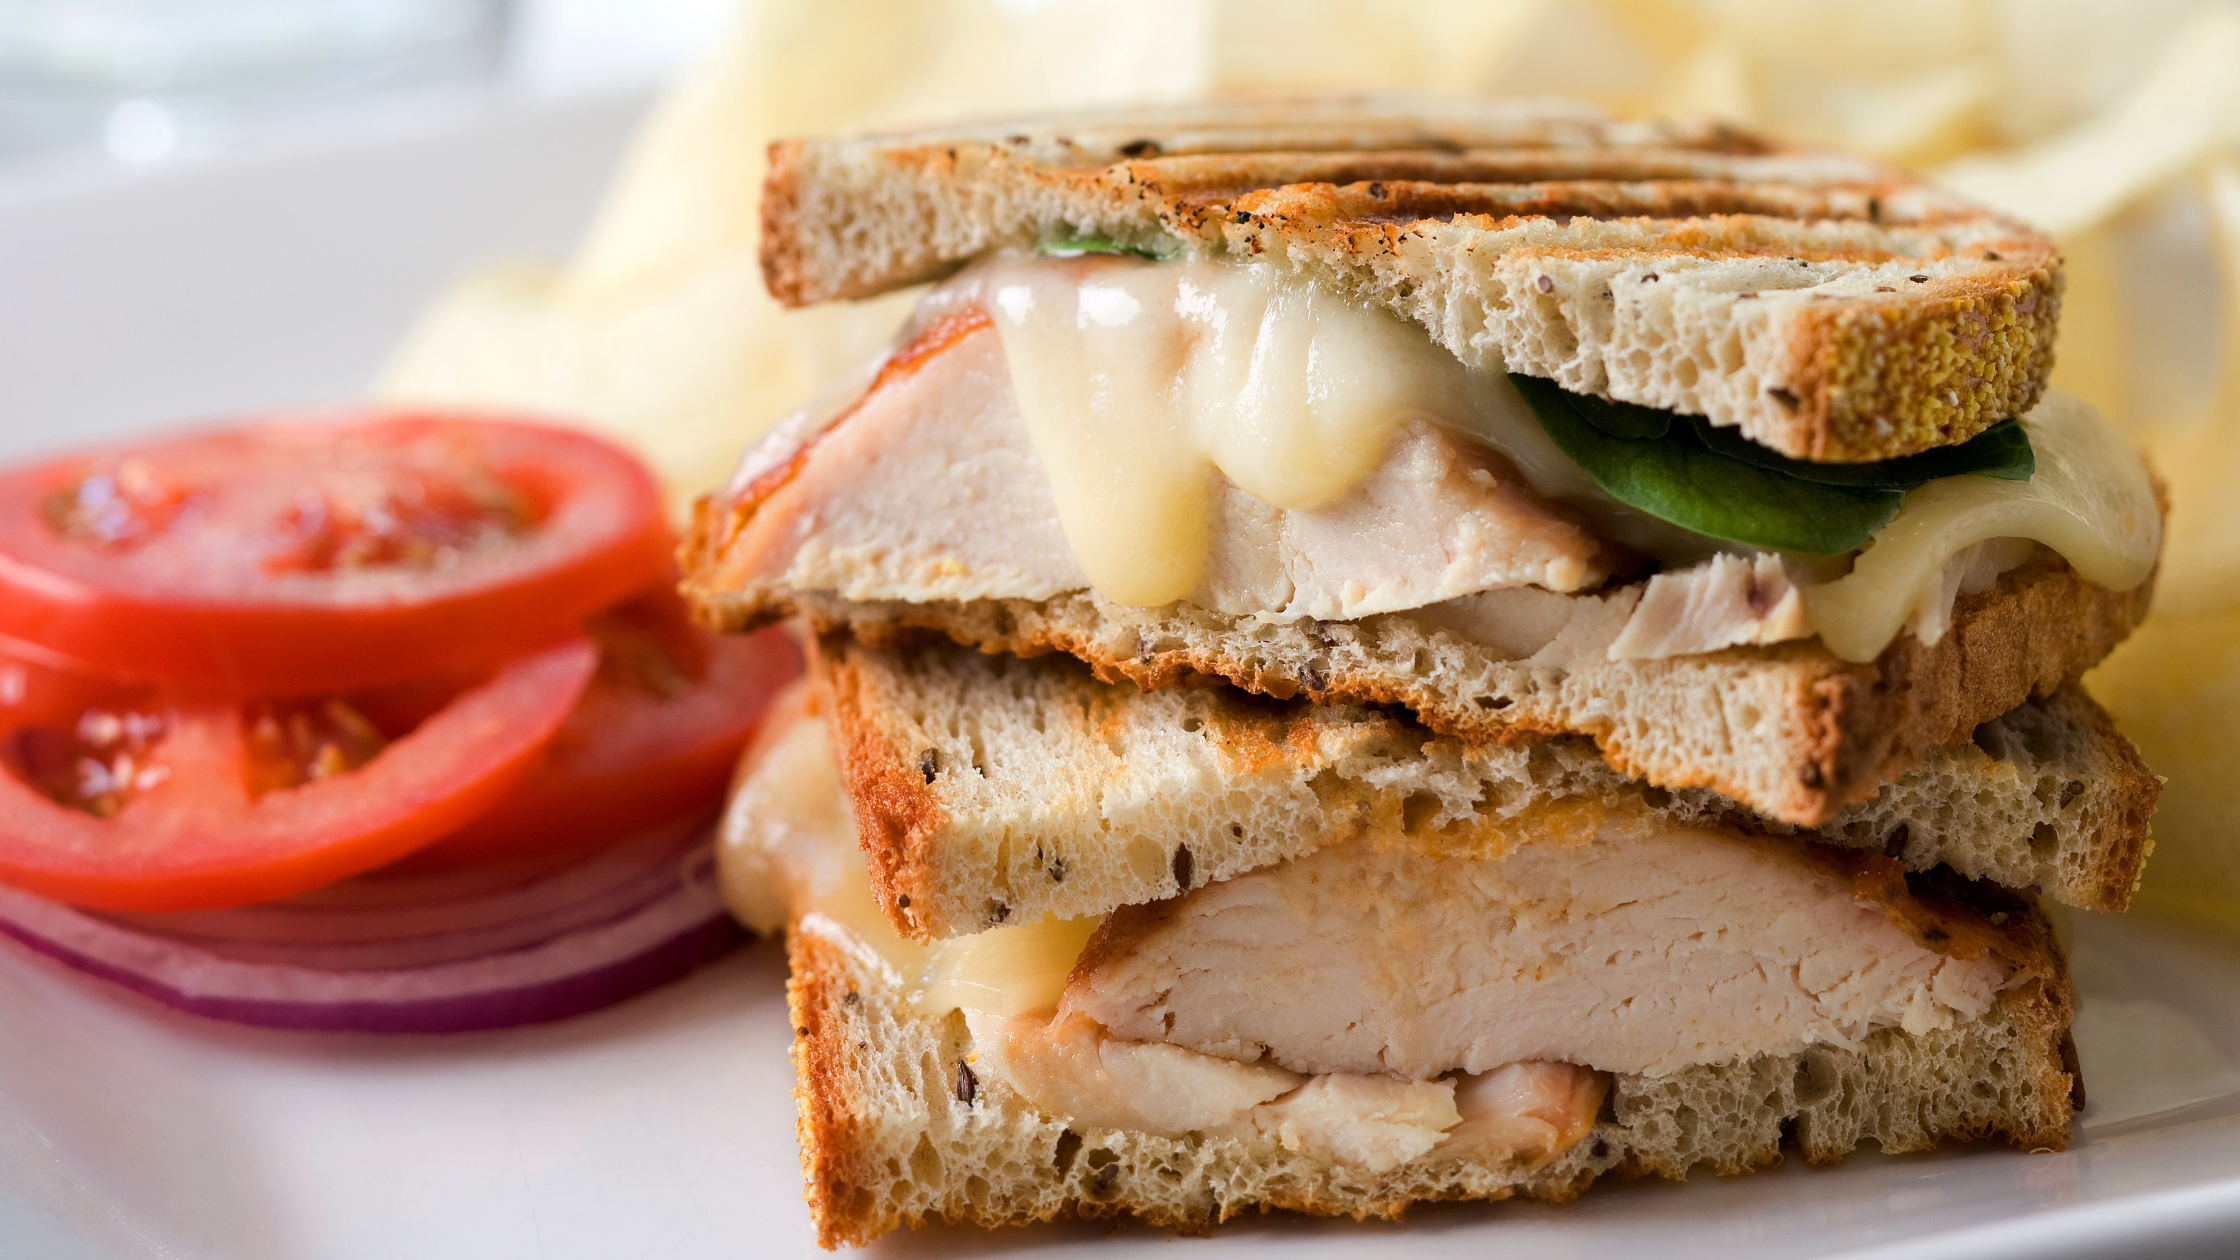 Flavorful Grilled Chicken & Brie Panini 23